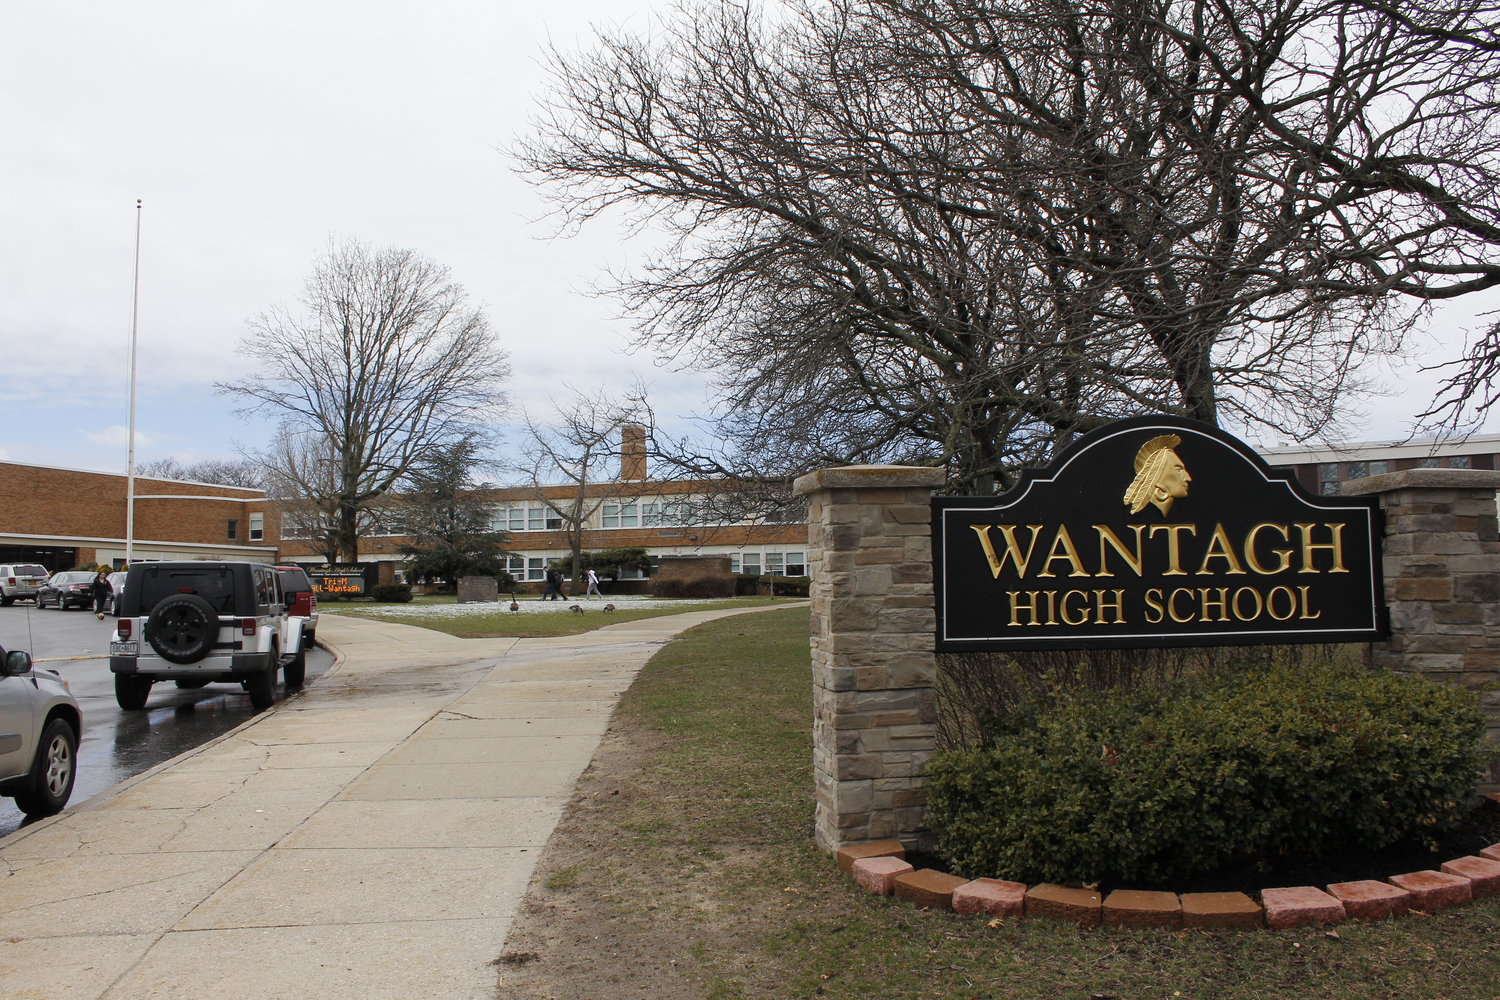 Parents questioned the Wantagh school board about a controversial video that surfaced of David Casamento, assistant superintendent in the East Meadow School District.